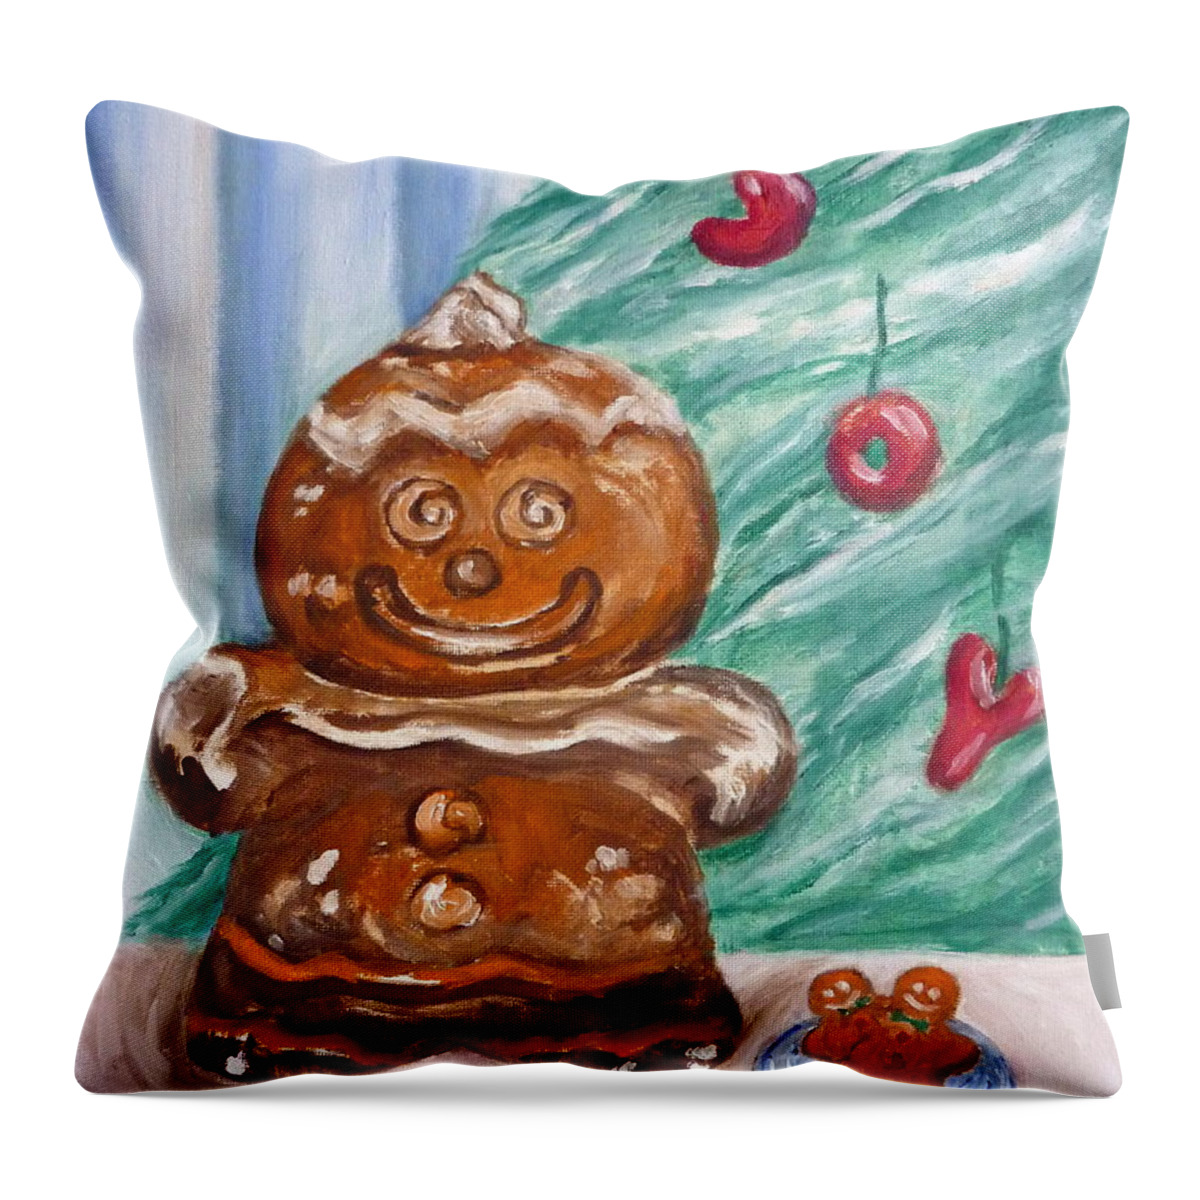 Christmas Throw Pillow featuring the painting Gingerbread Cookies by Victoria Lakes